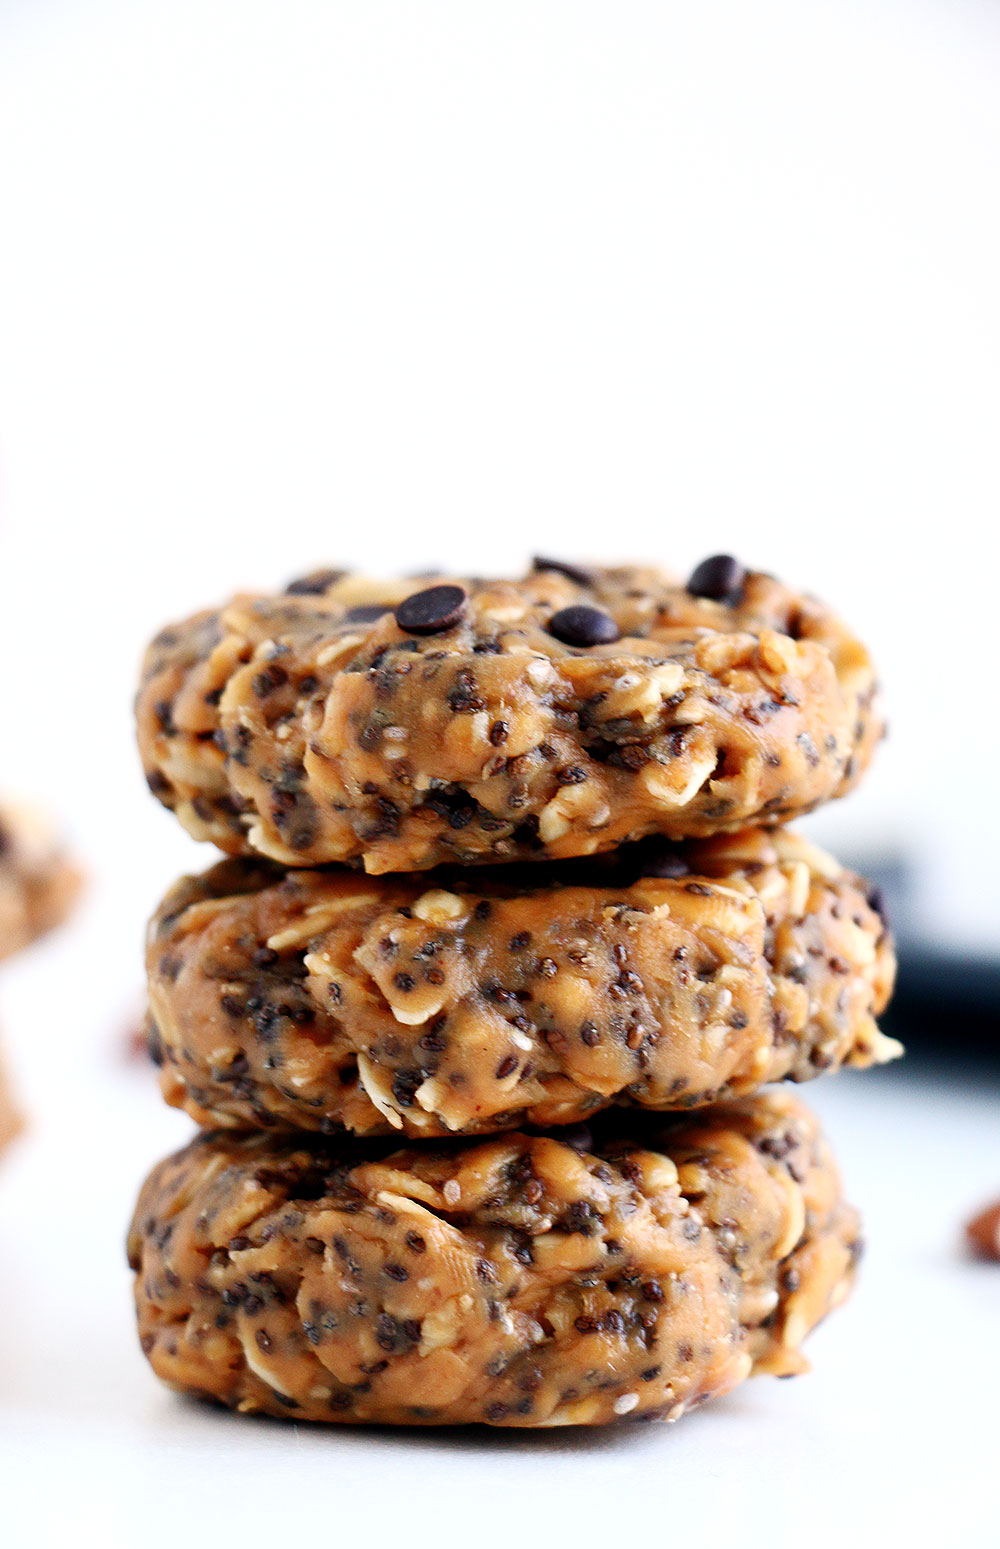 No bake breakfast cookies are great meal prep ideas for hot weather.